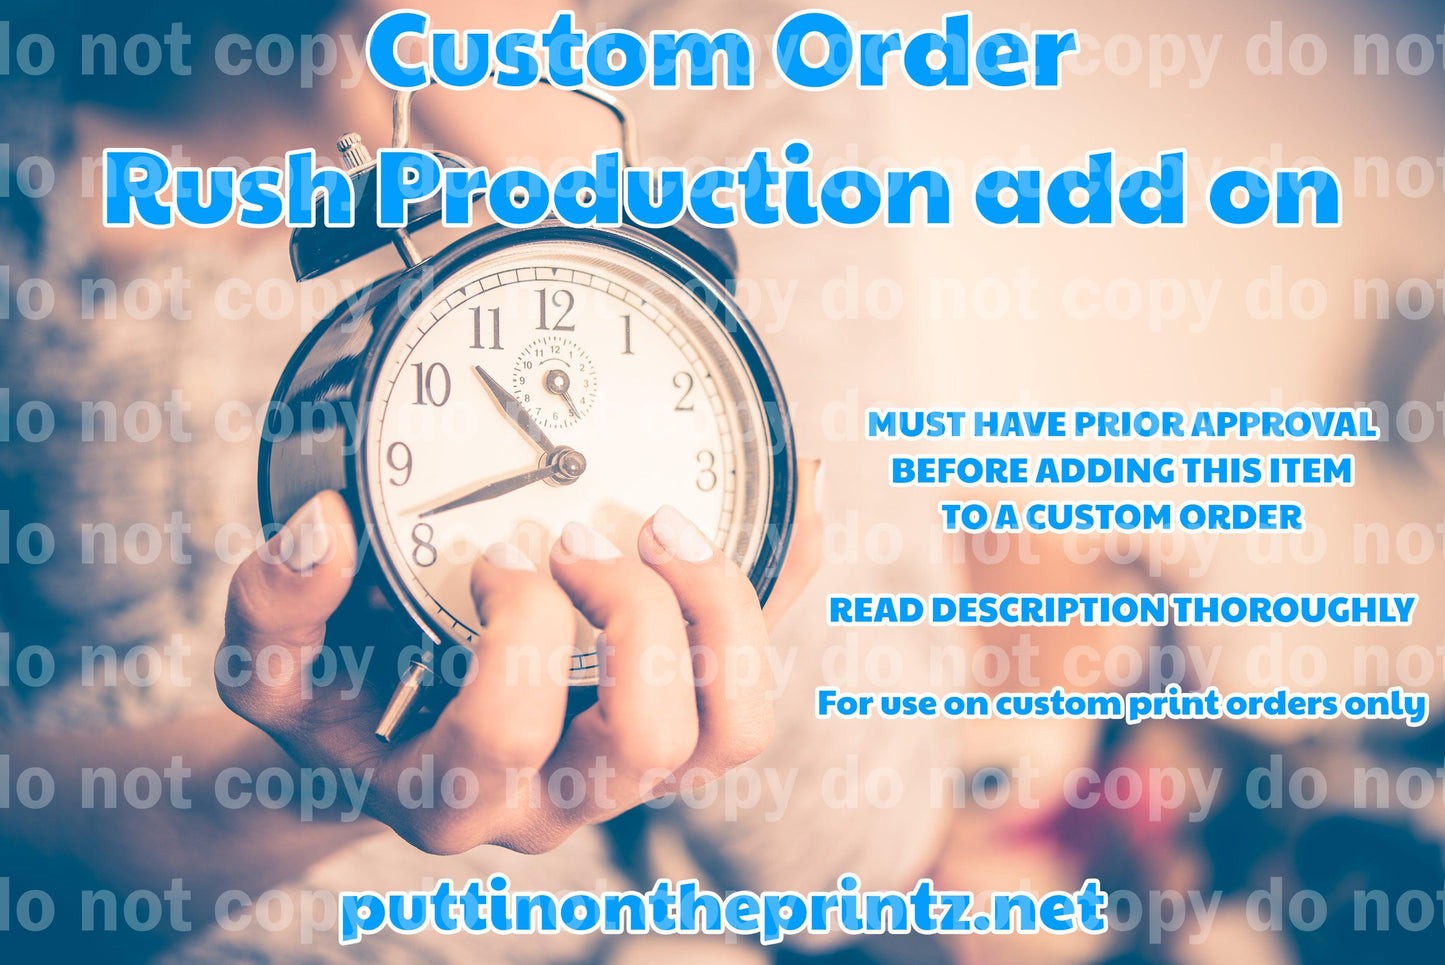 Custom order rush production fee *REQUIRES APPROVAL*